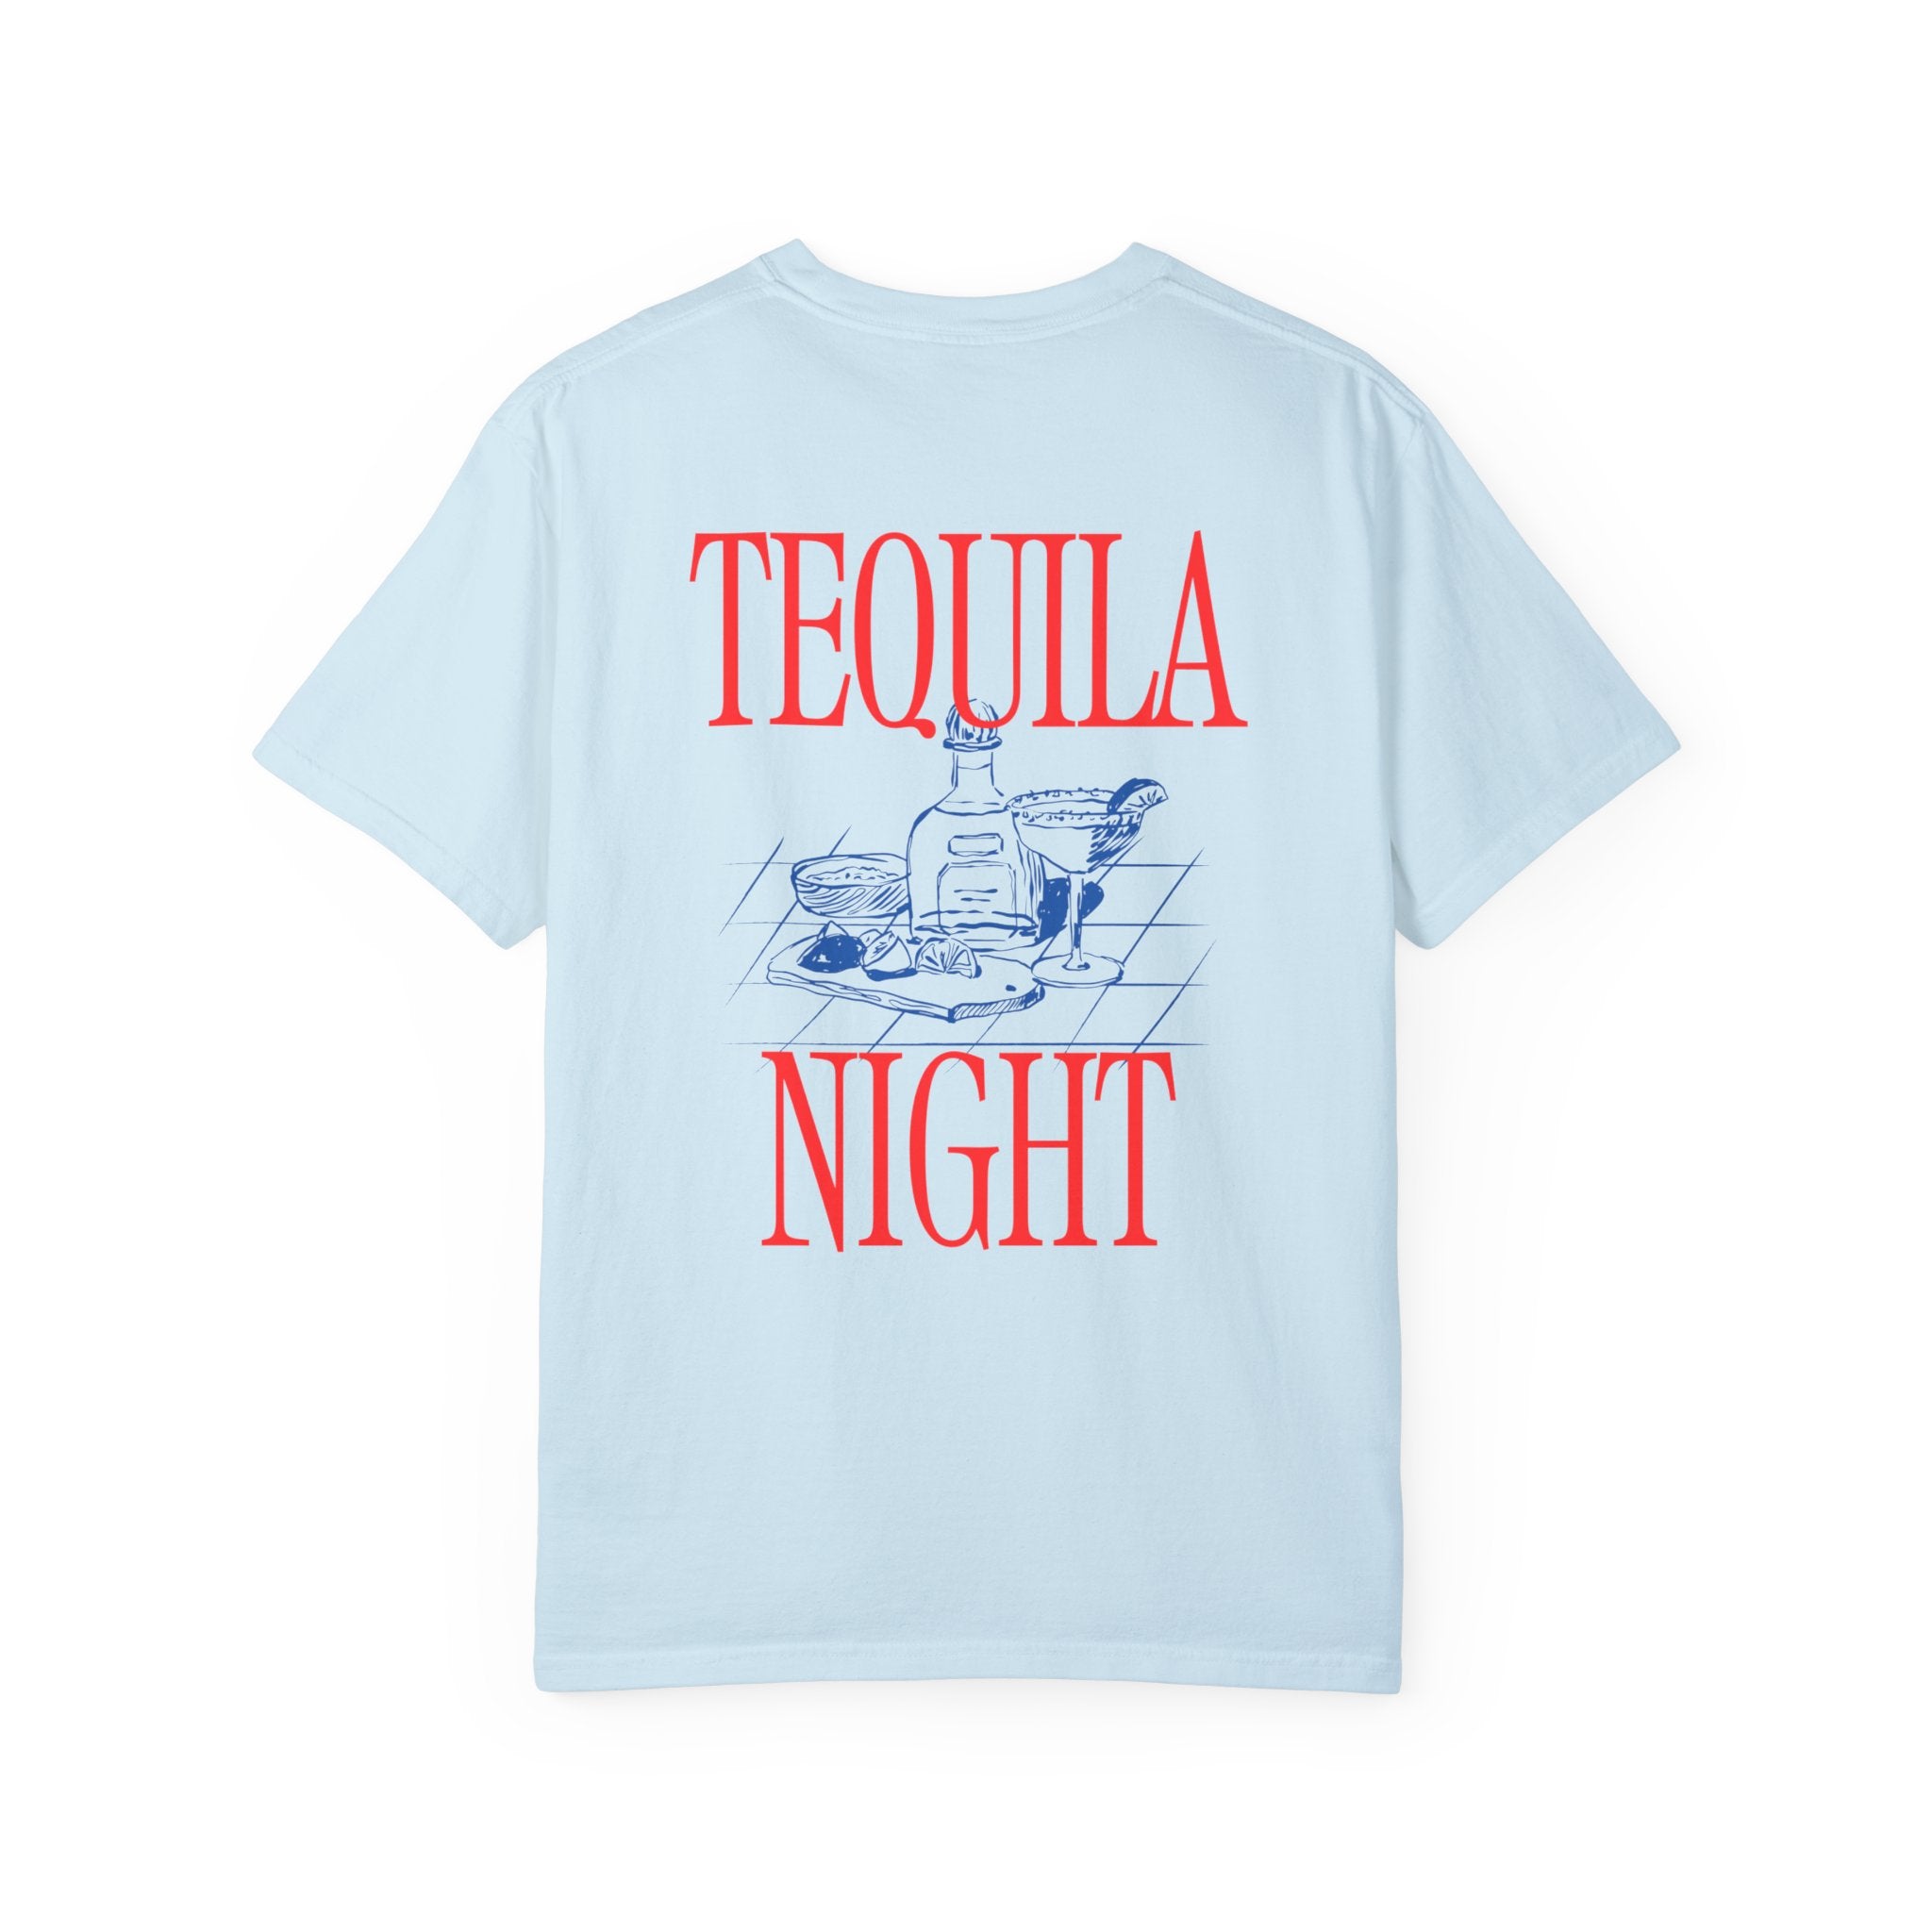 Tequila Night Comfort Colors T Shirt